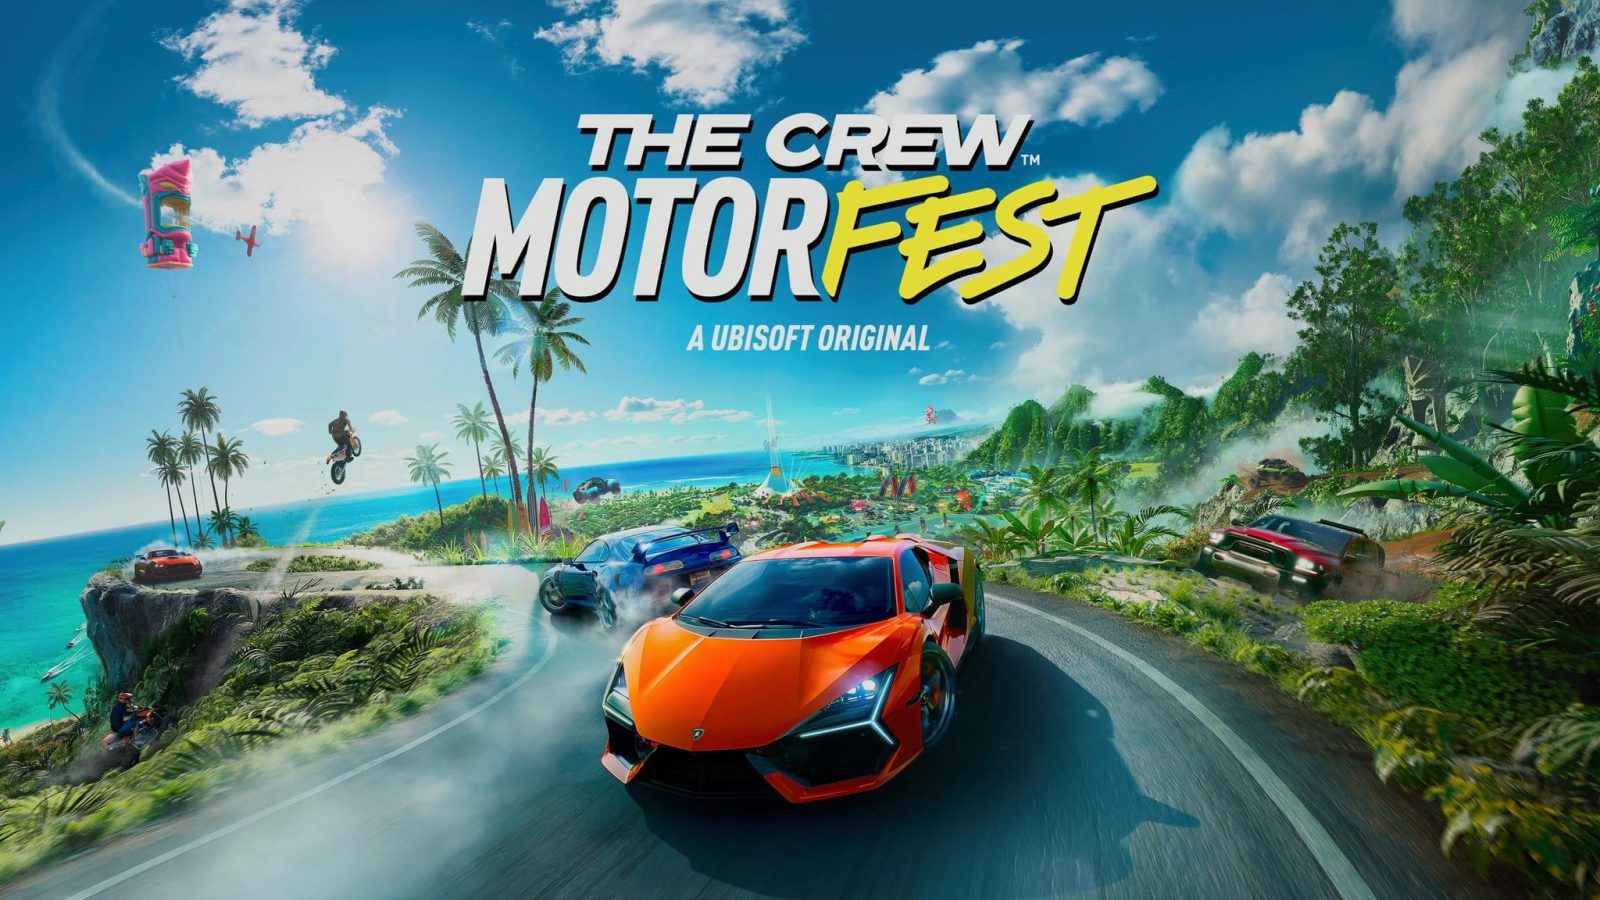 The Crew Motorfest Fastest Car: How to get the Fastest Car in Hawaii